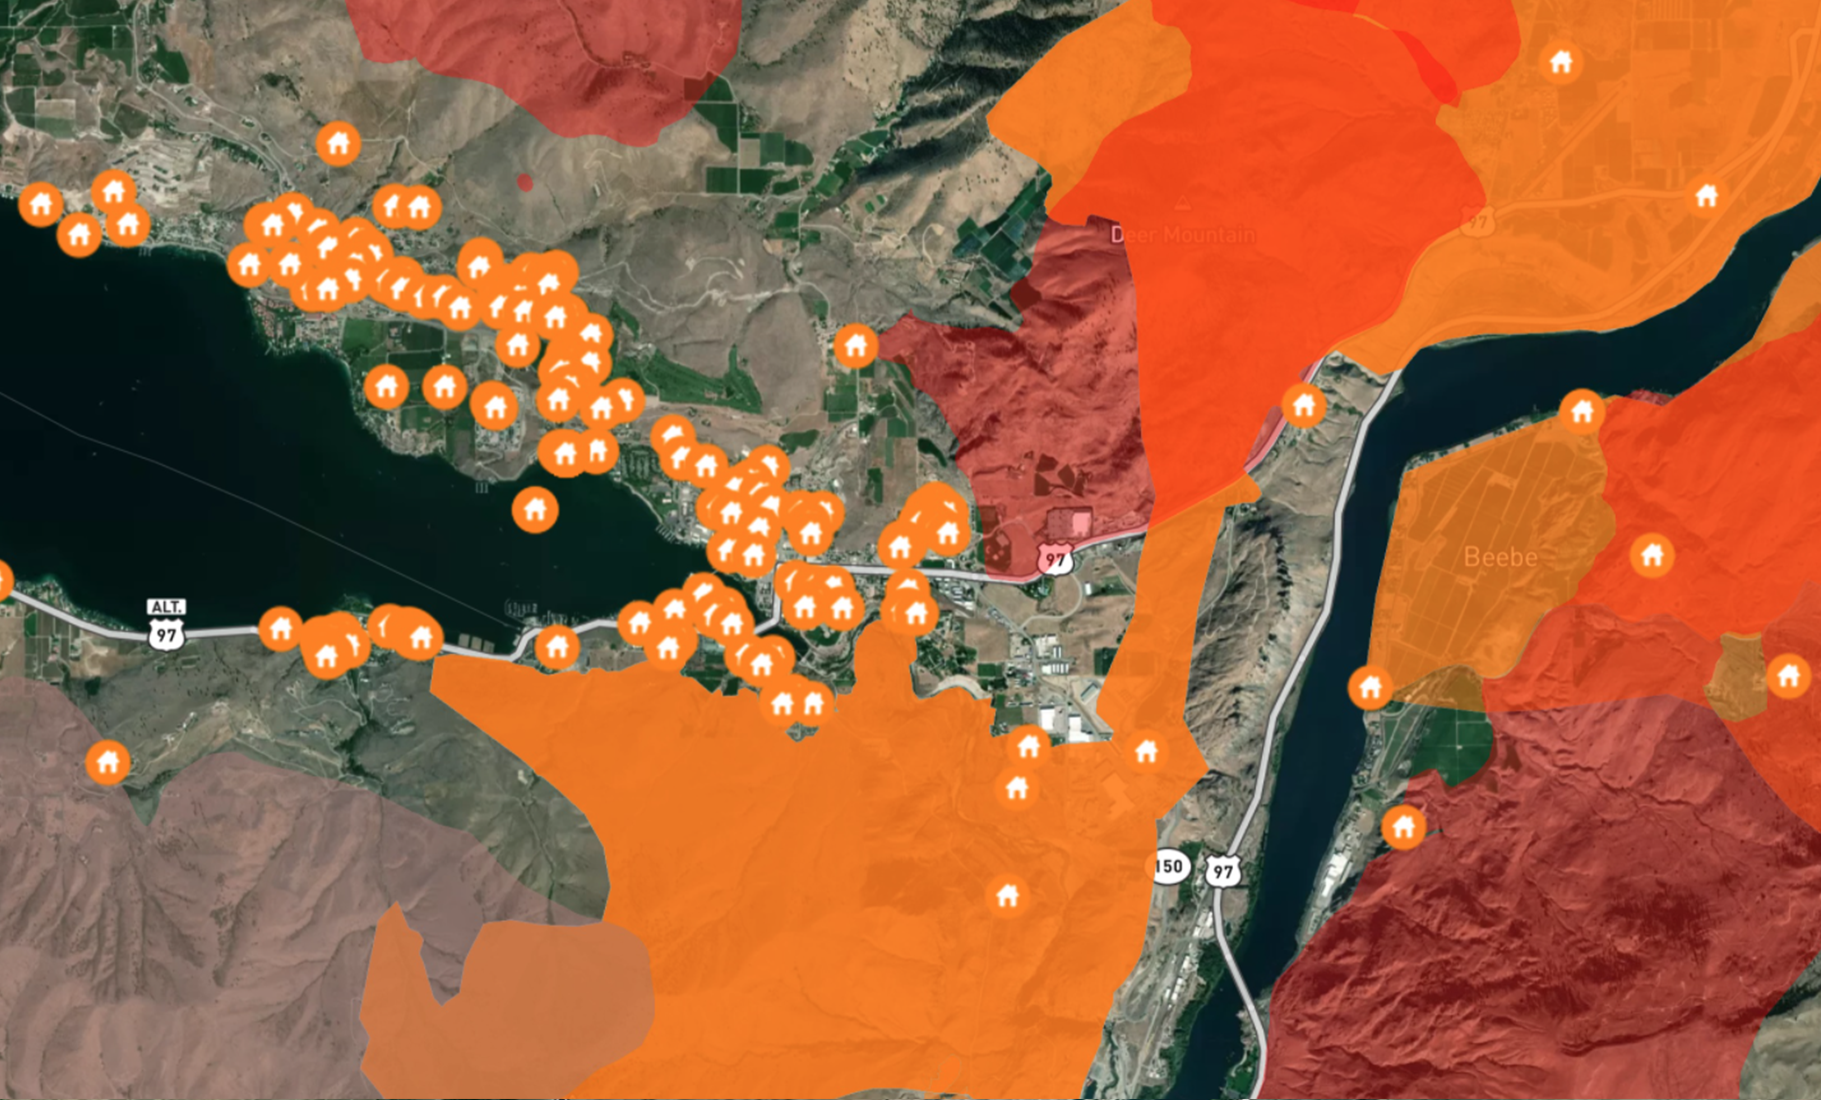 Lake Chelan fire danger map with insured houses